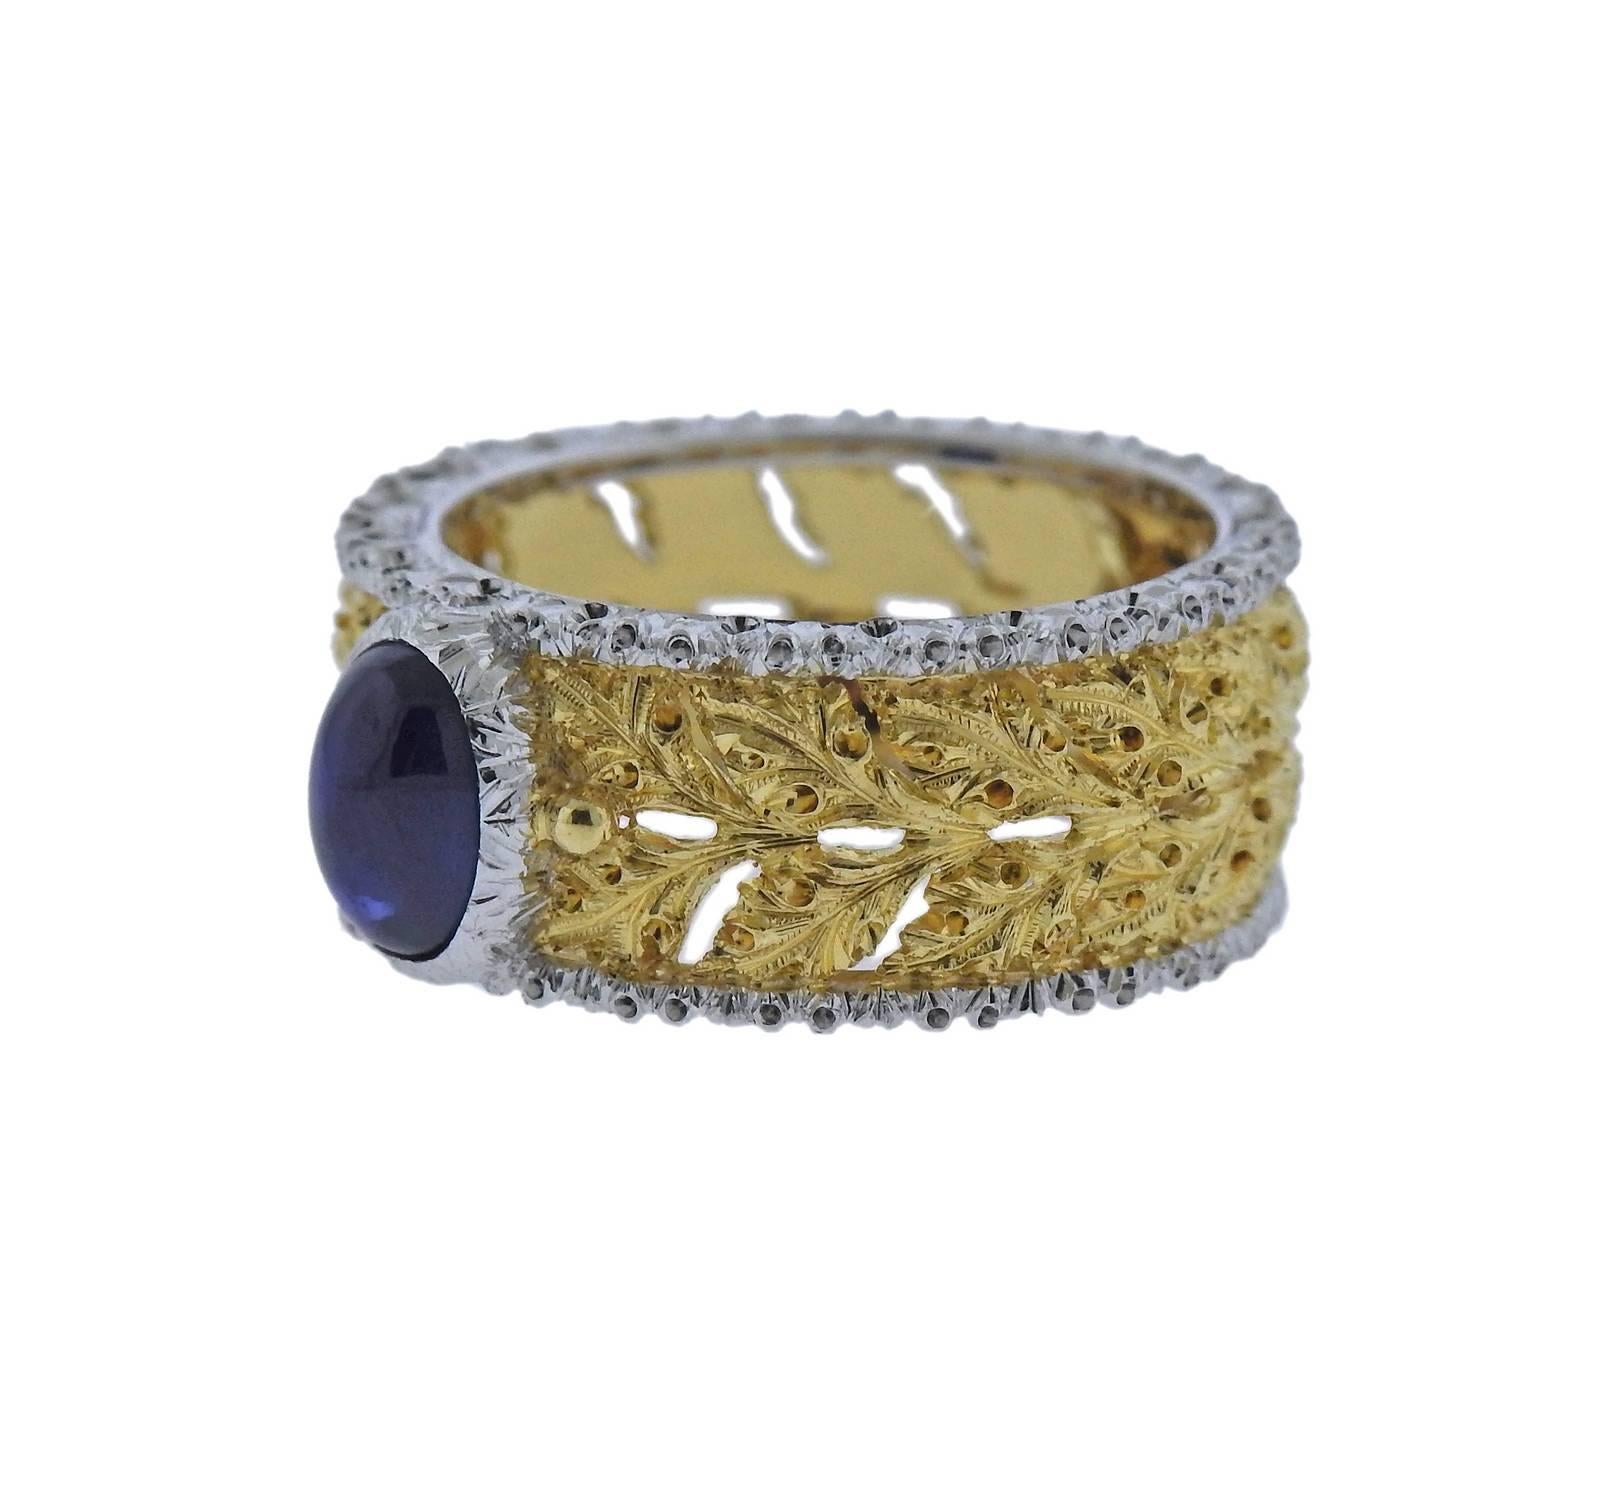 An 18k gold ring crafted by Buccellati. Features a 1.31ct cabohon sapphire. Ring size - 6, ring is 8.8mm wide, weight is 7.4 grams. Marked A2019, Italy, 18k, Gianmaria Buccellati .